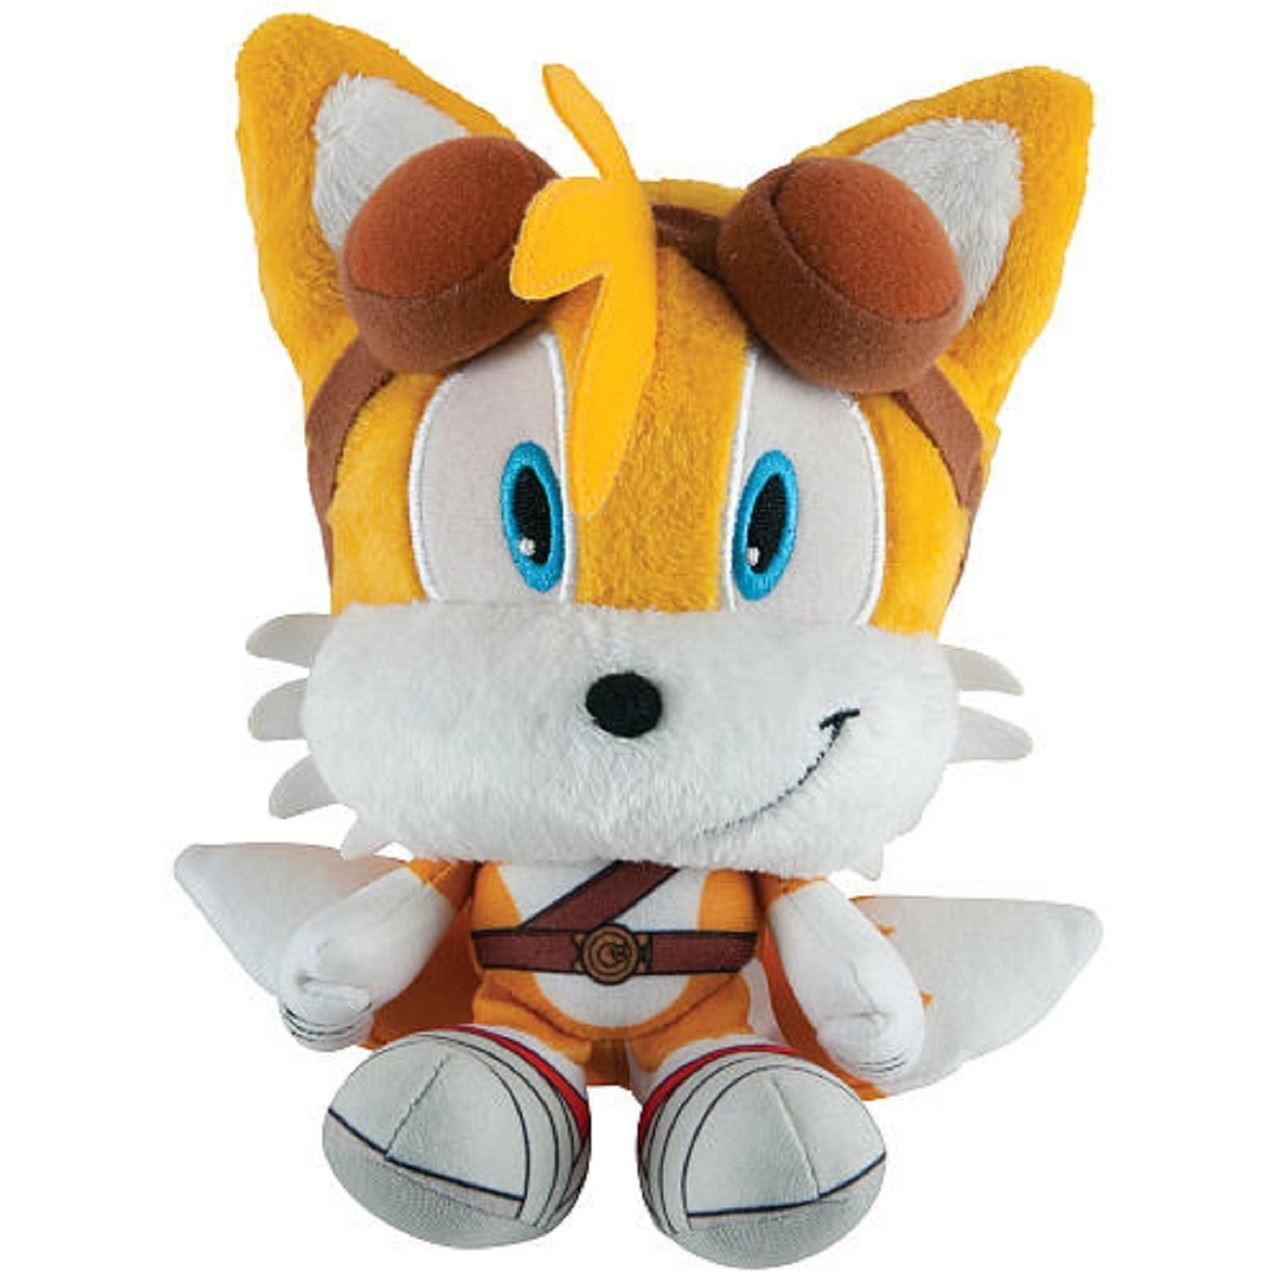 Plush toy of Tails, a character from the Sonic the Hedgehog series, featuring orange and white colors, large blue eyes, and twin tails, designed as a Sonic Boom Small Big Head Plush - Tails by TOMY.